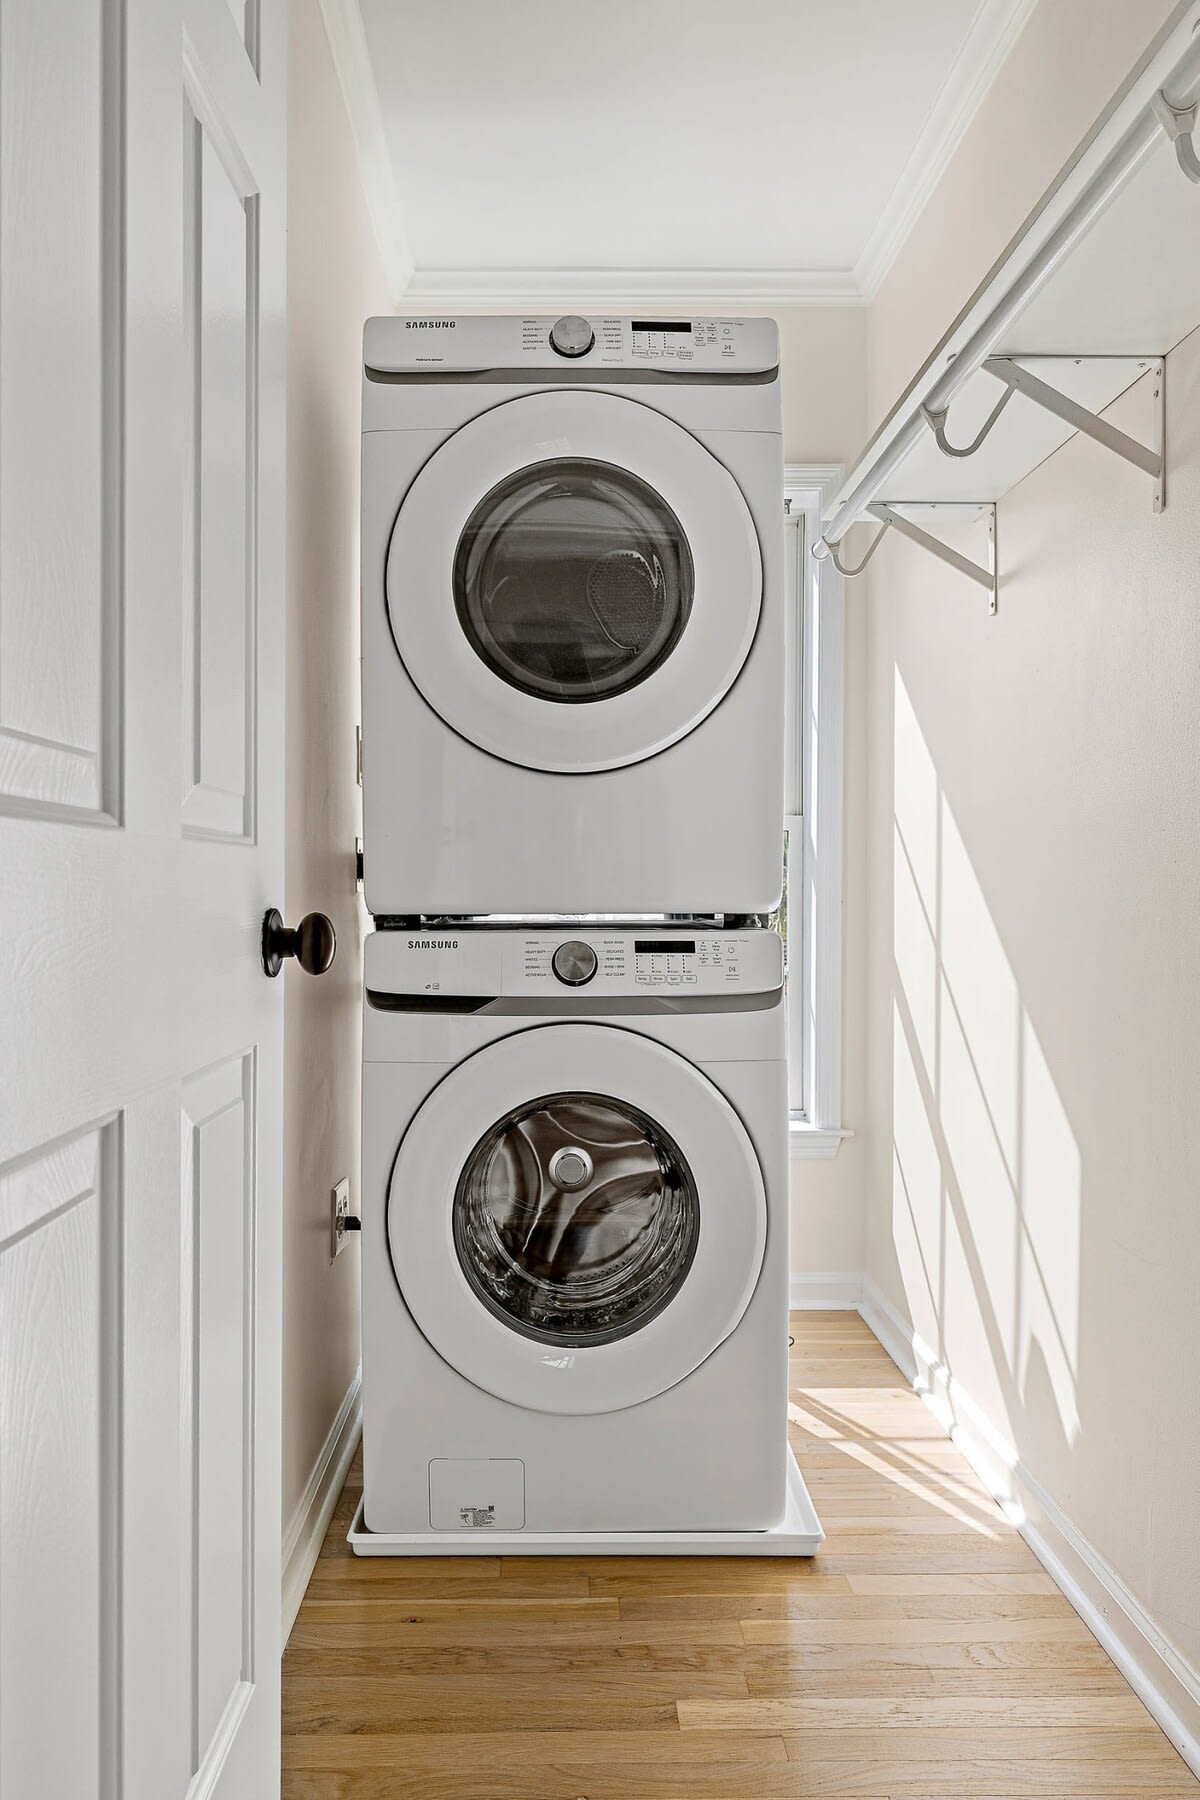 Washer + Dryer for laundry during your stay!